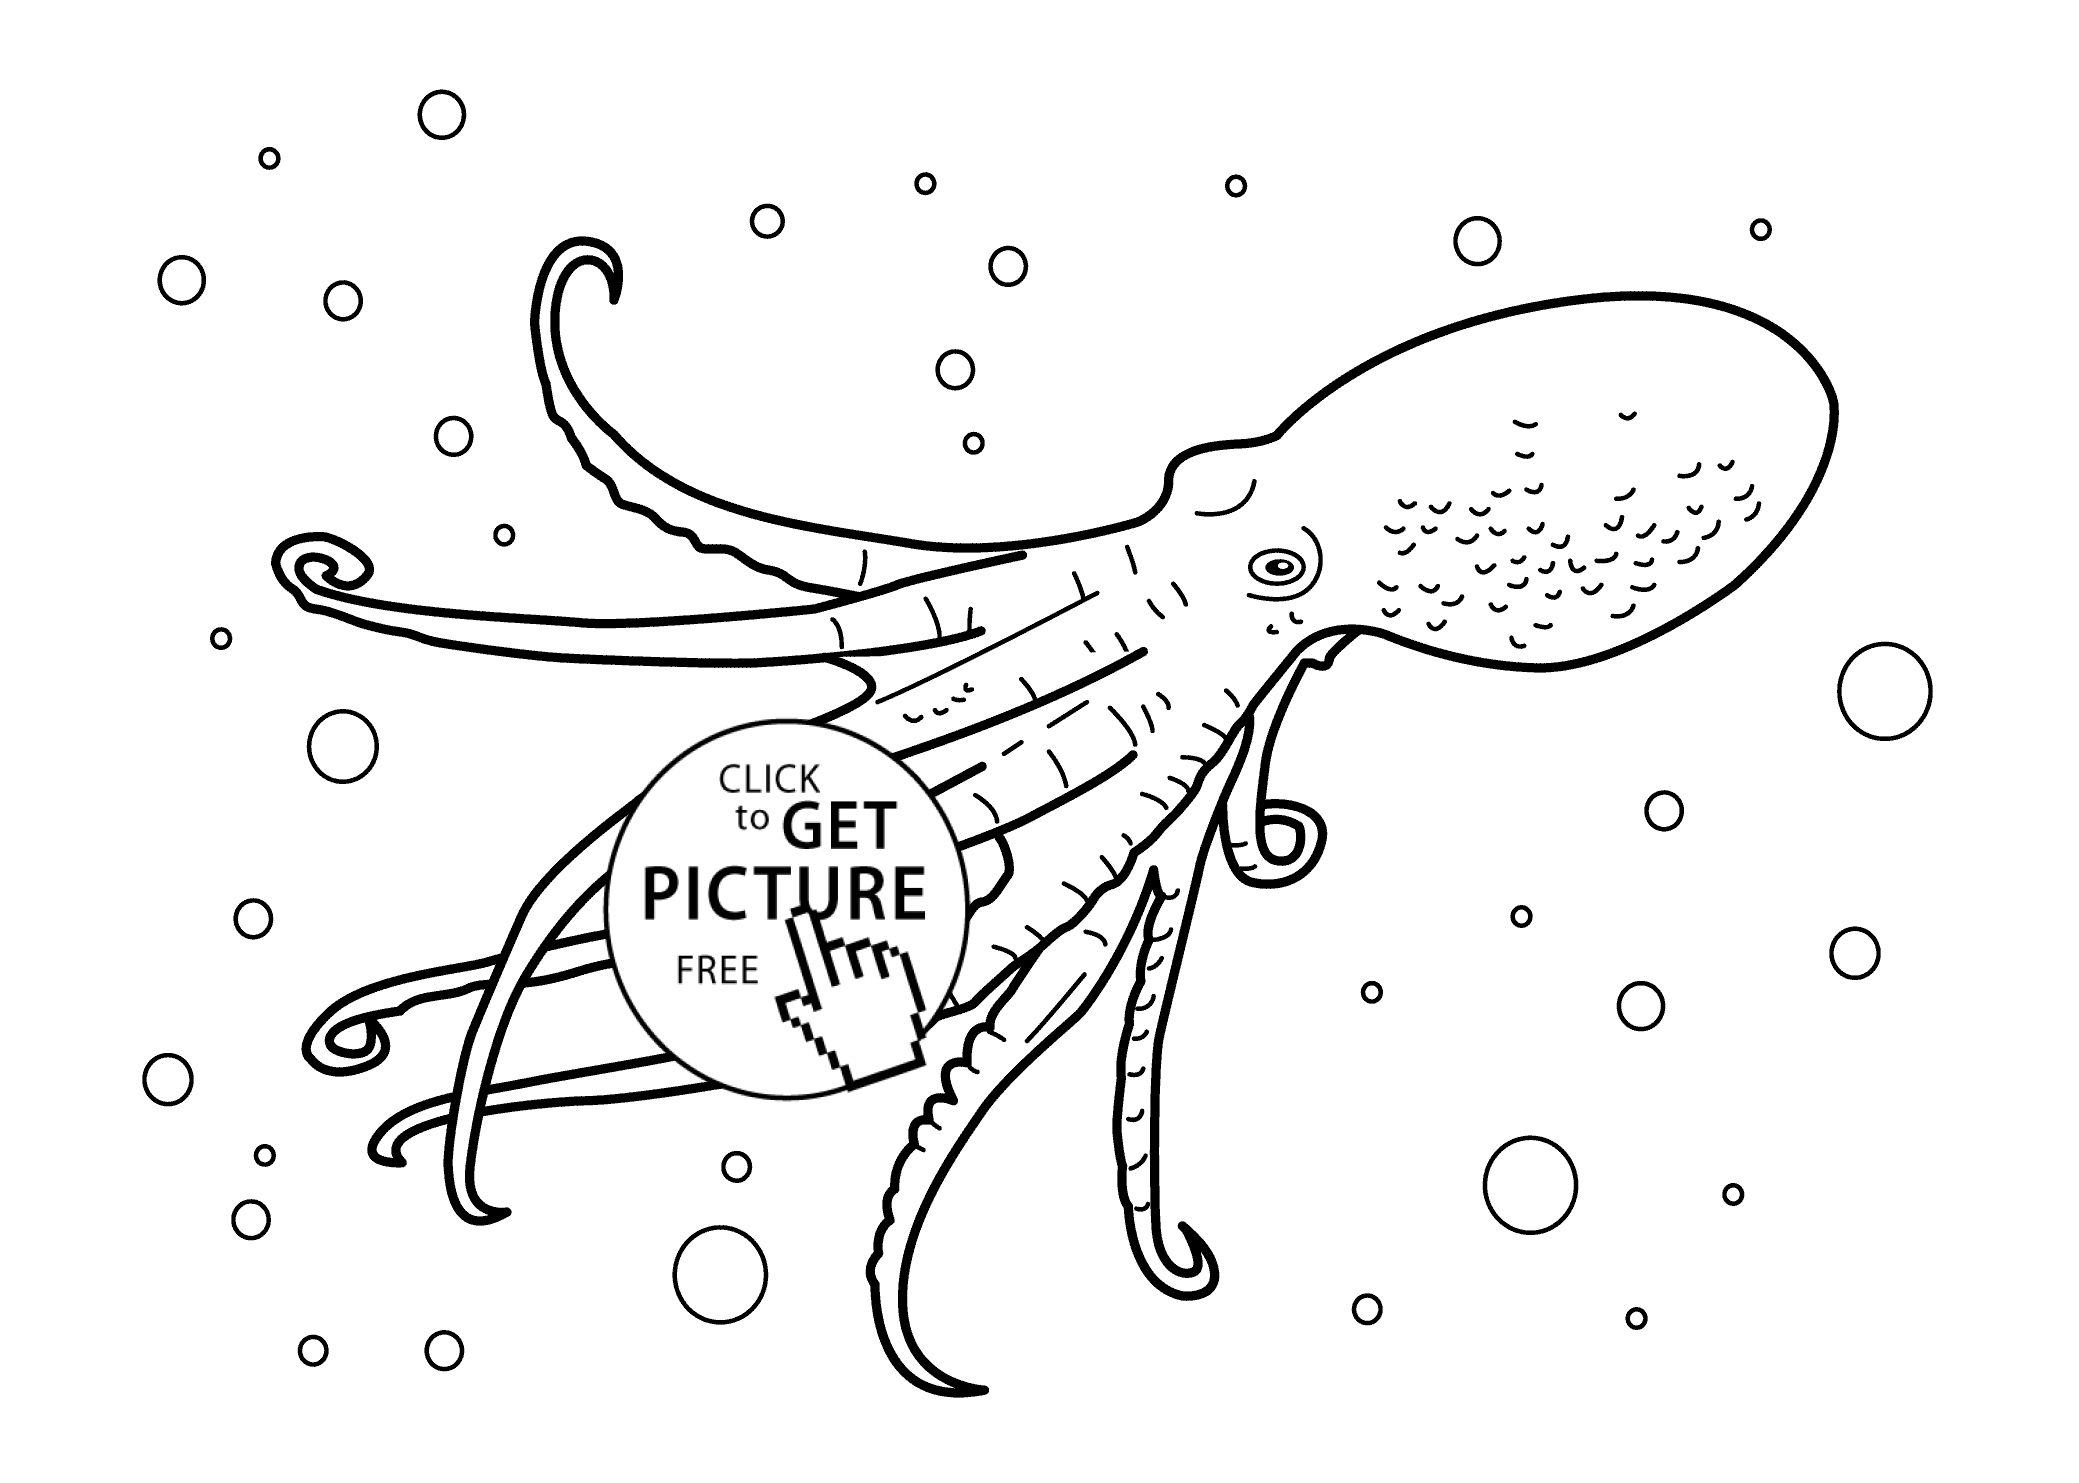 Octopus real - sea animals coloring pages for kids, printable free